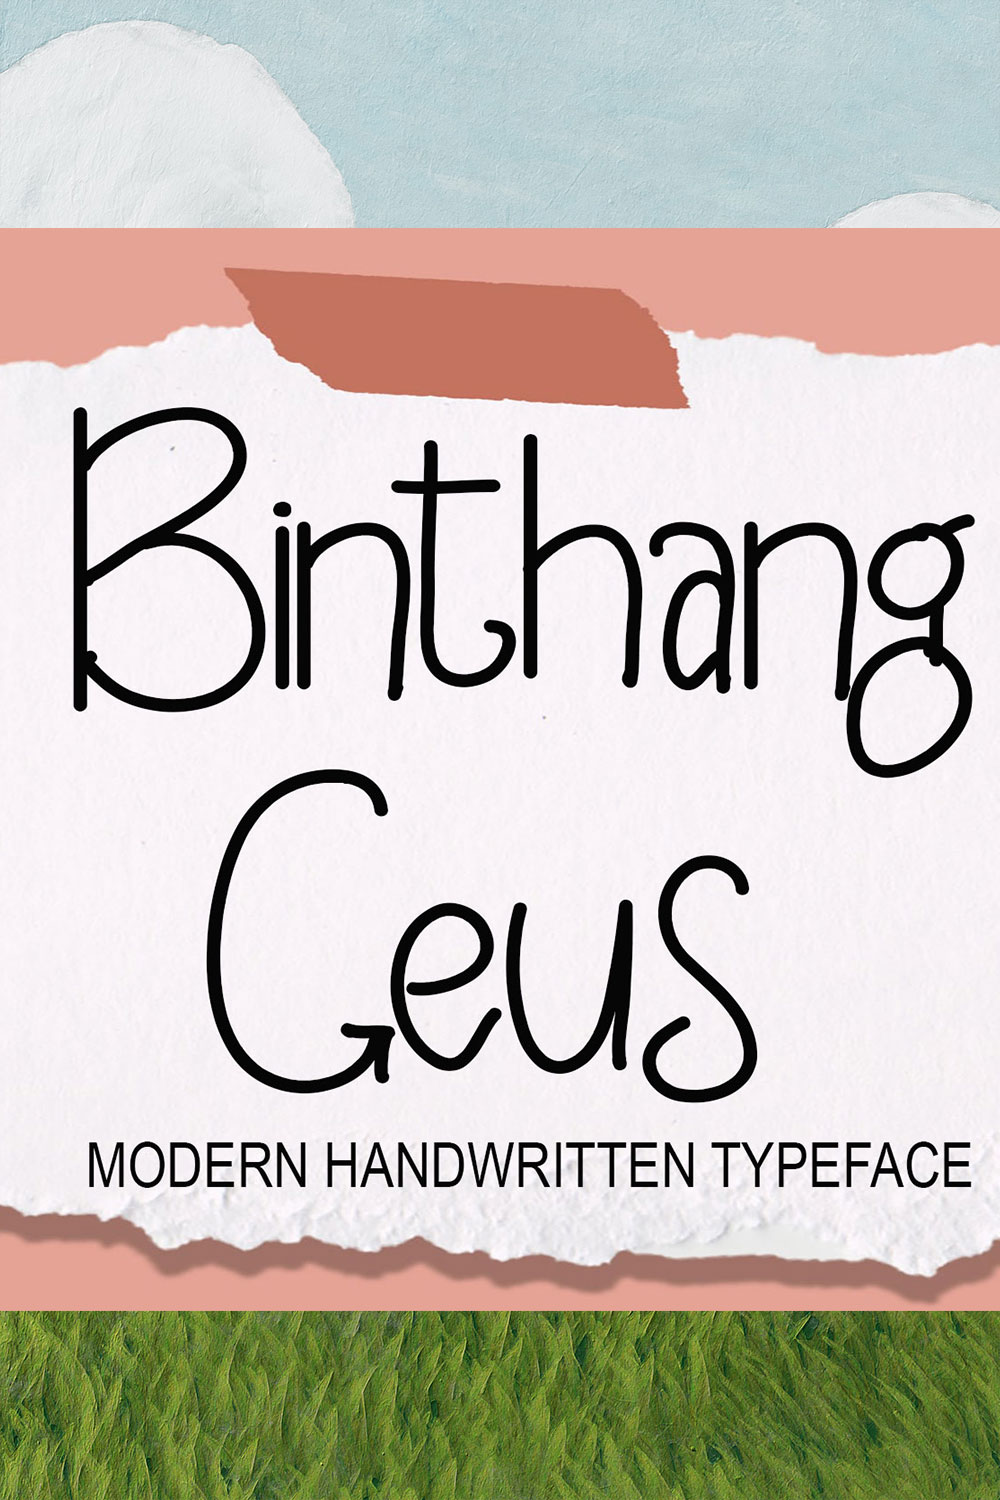 An image with text showing the wonderful Binthang Geus font.